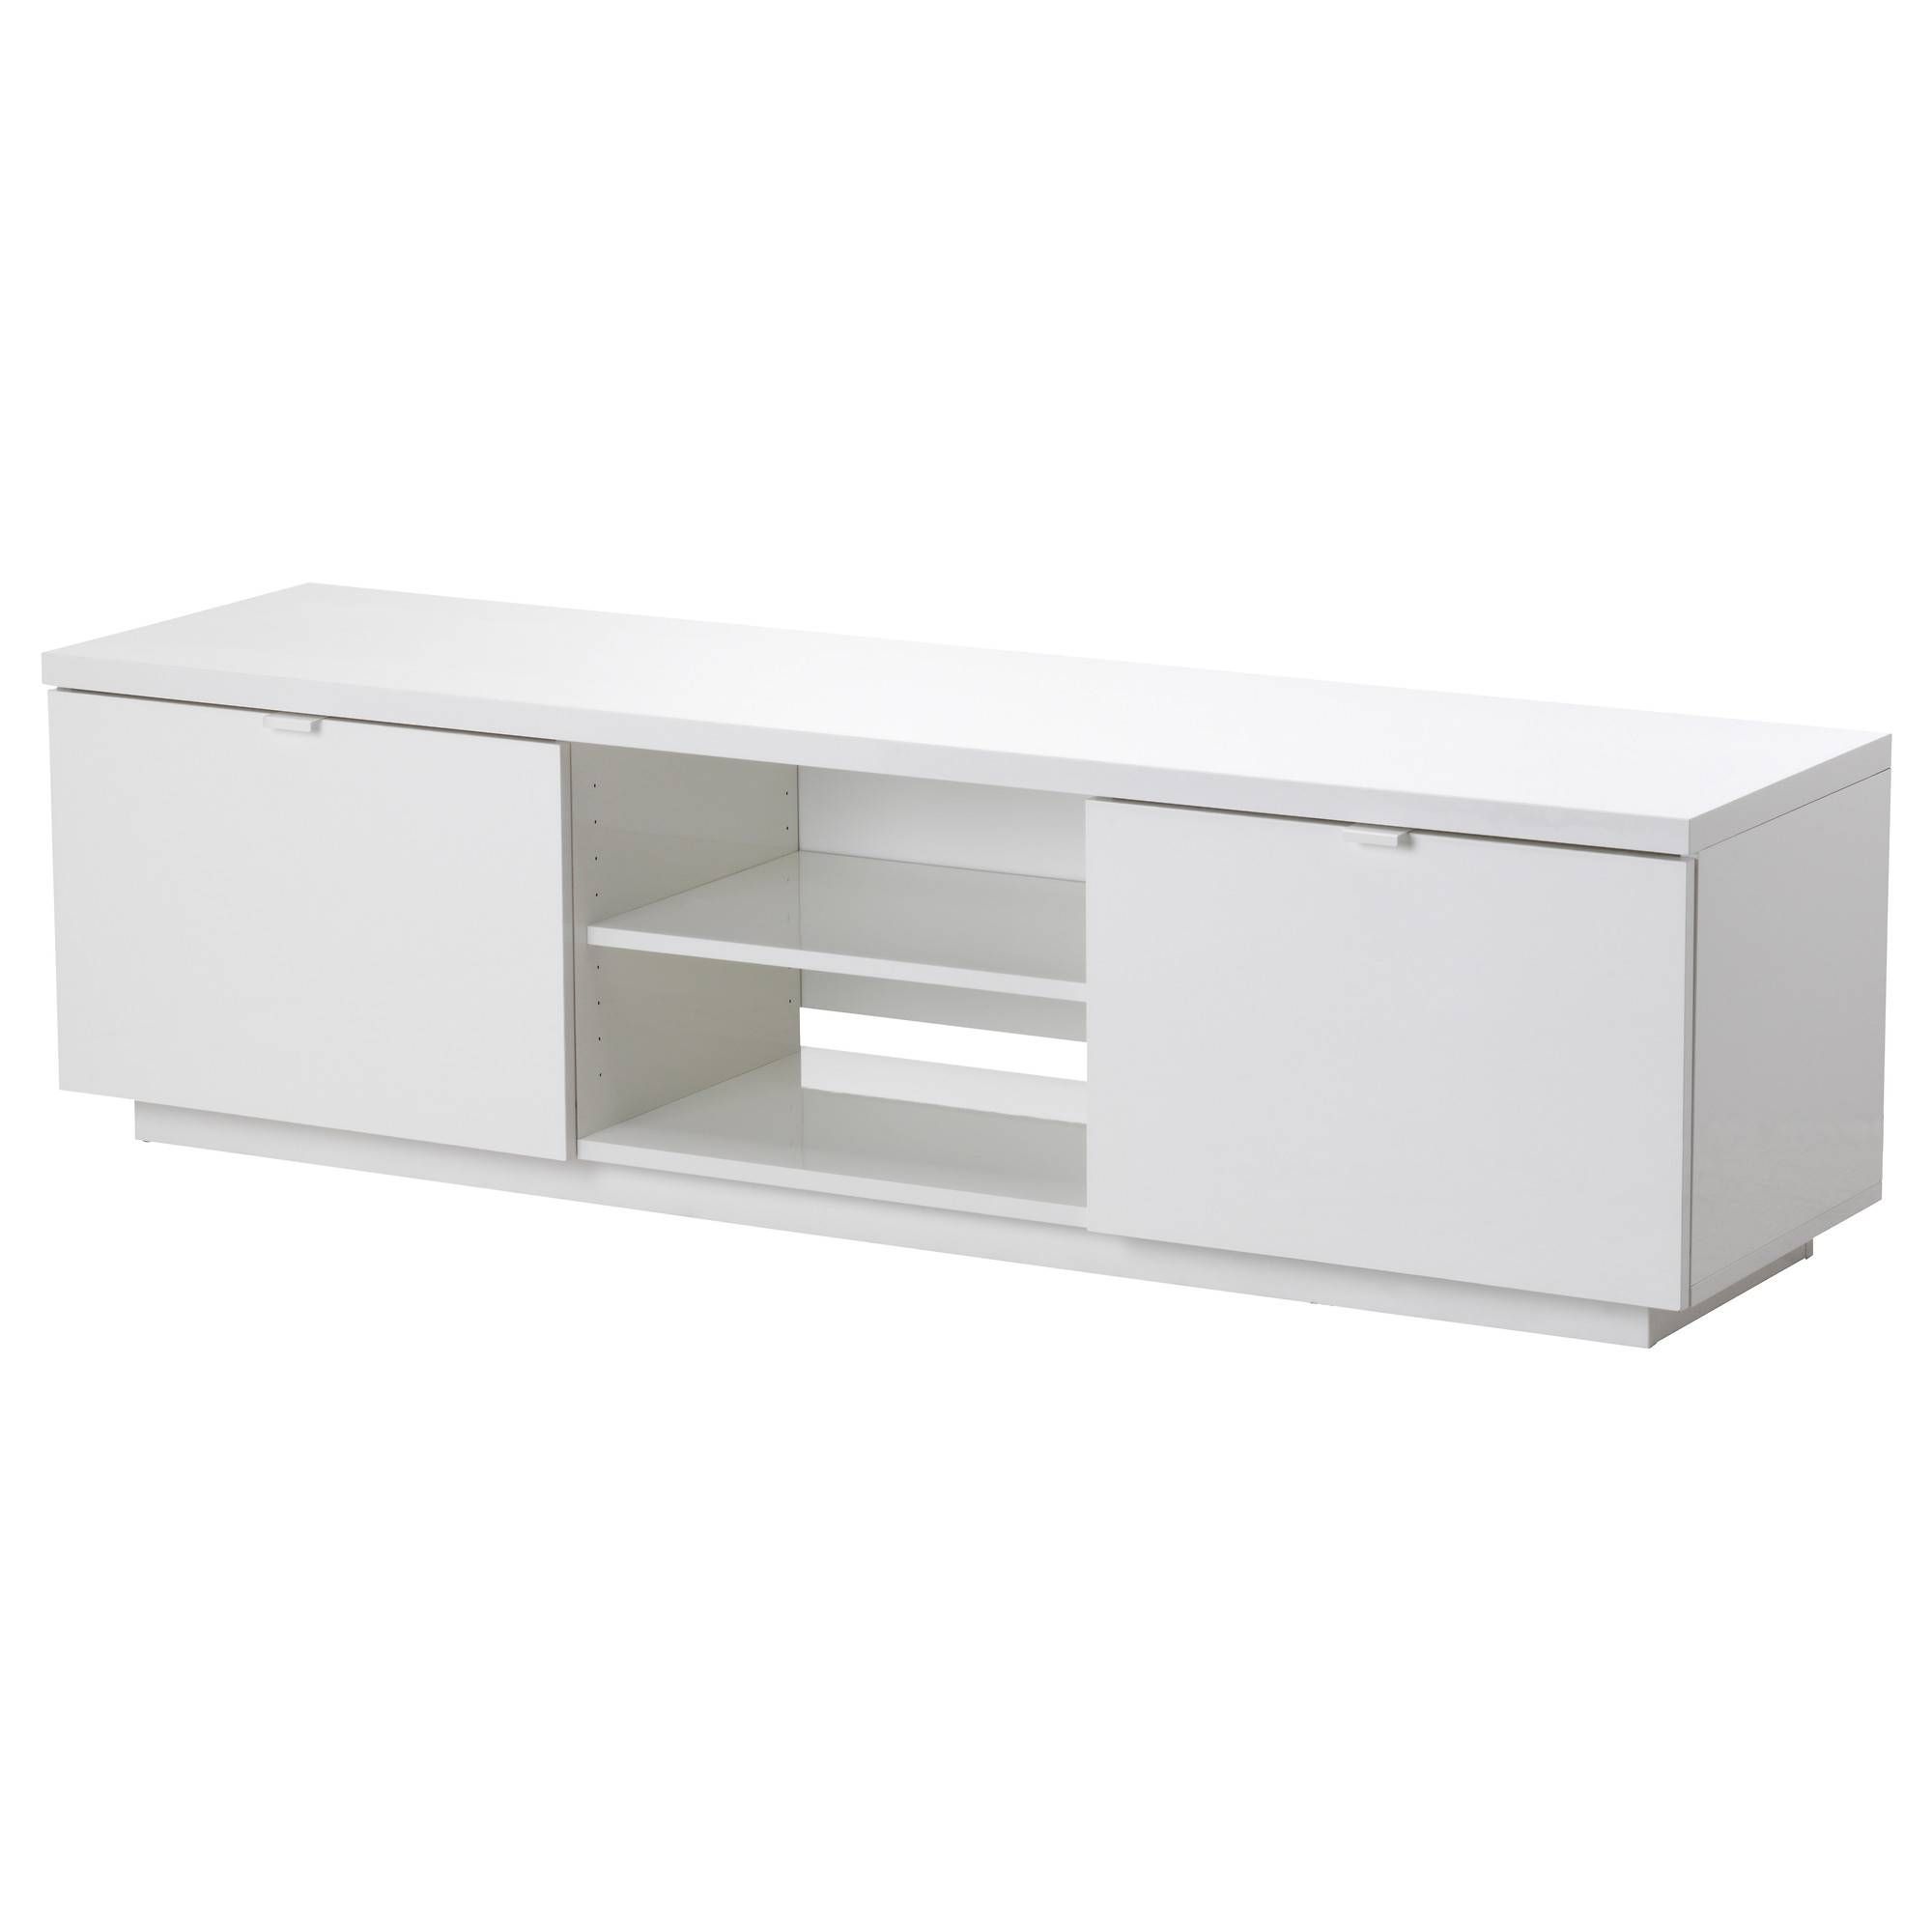 Tv Stands & Tv Units | Ikea Throughout White Tv Cabinets (View 1 of 15)